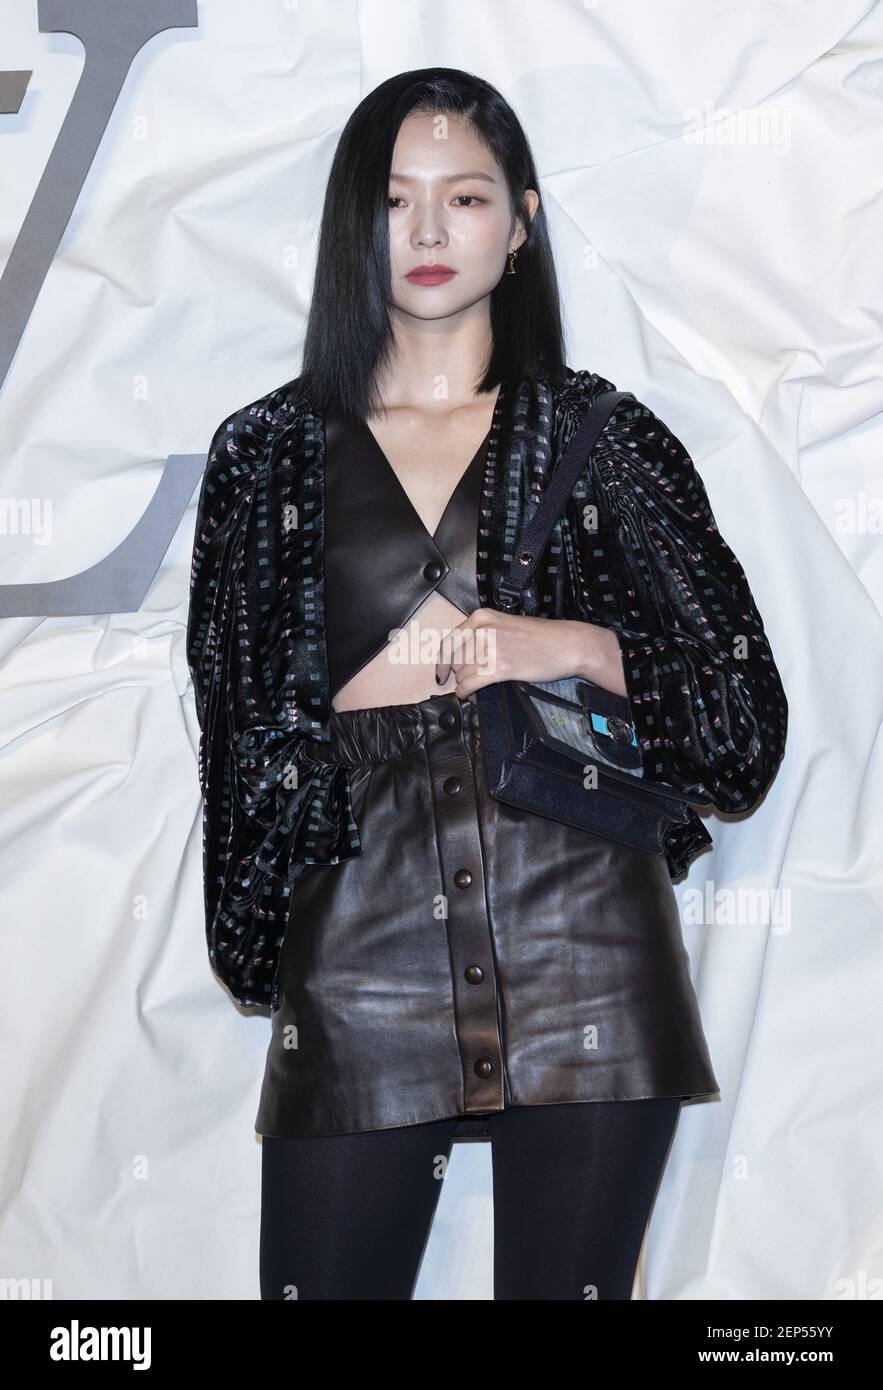 South Korean actress Lee Som, attends a photo call for the Louis Vuitton  launching at Louis Vuitton Seoul in Seoul, South Korea on October 30, 2019.  (Photo by: Lee Young-ho/Sipa USA Stock